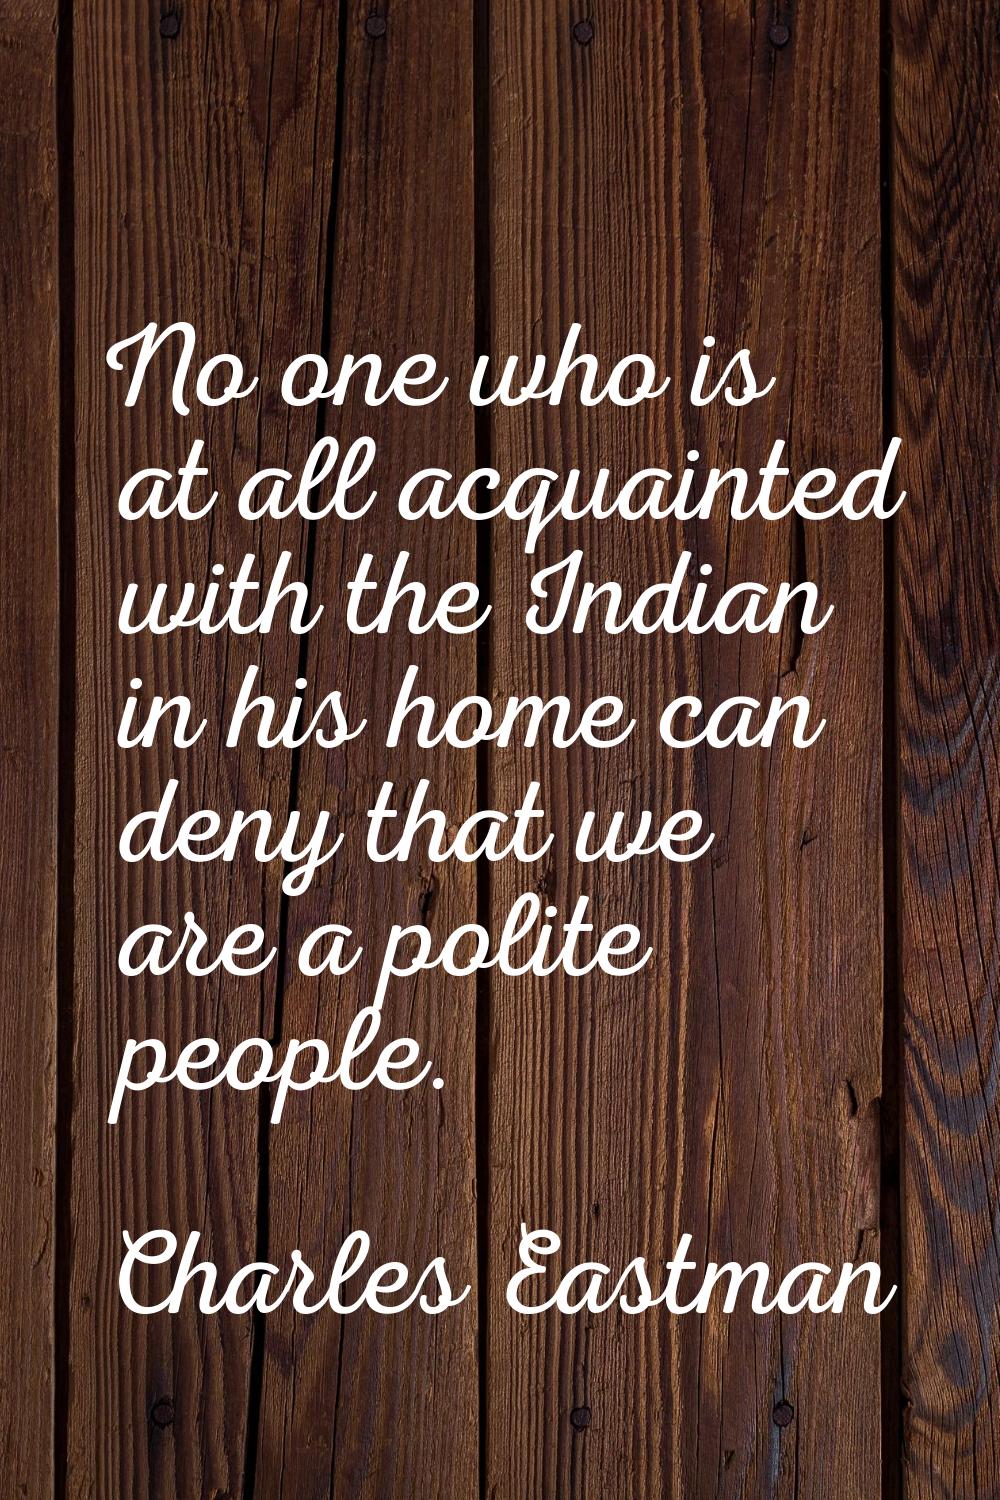 No one who is at all acquainted with the Indian in his home can deny that we are a polite people.